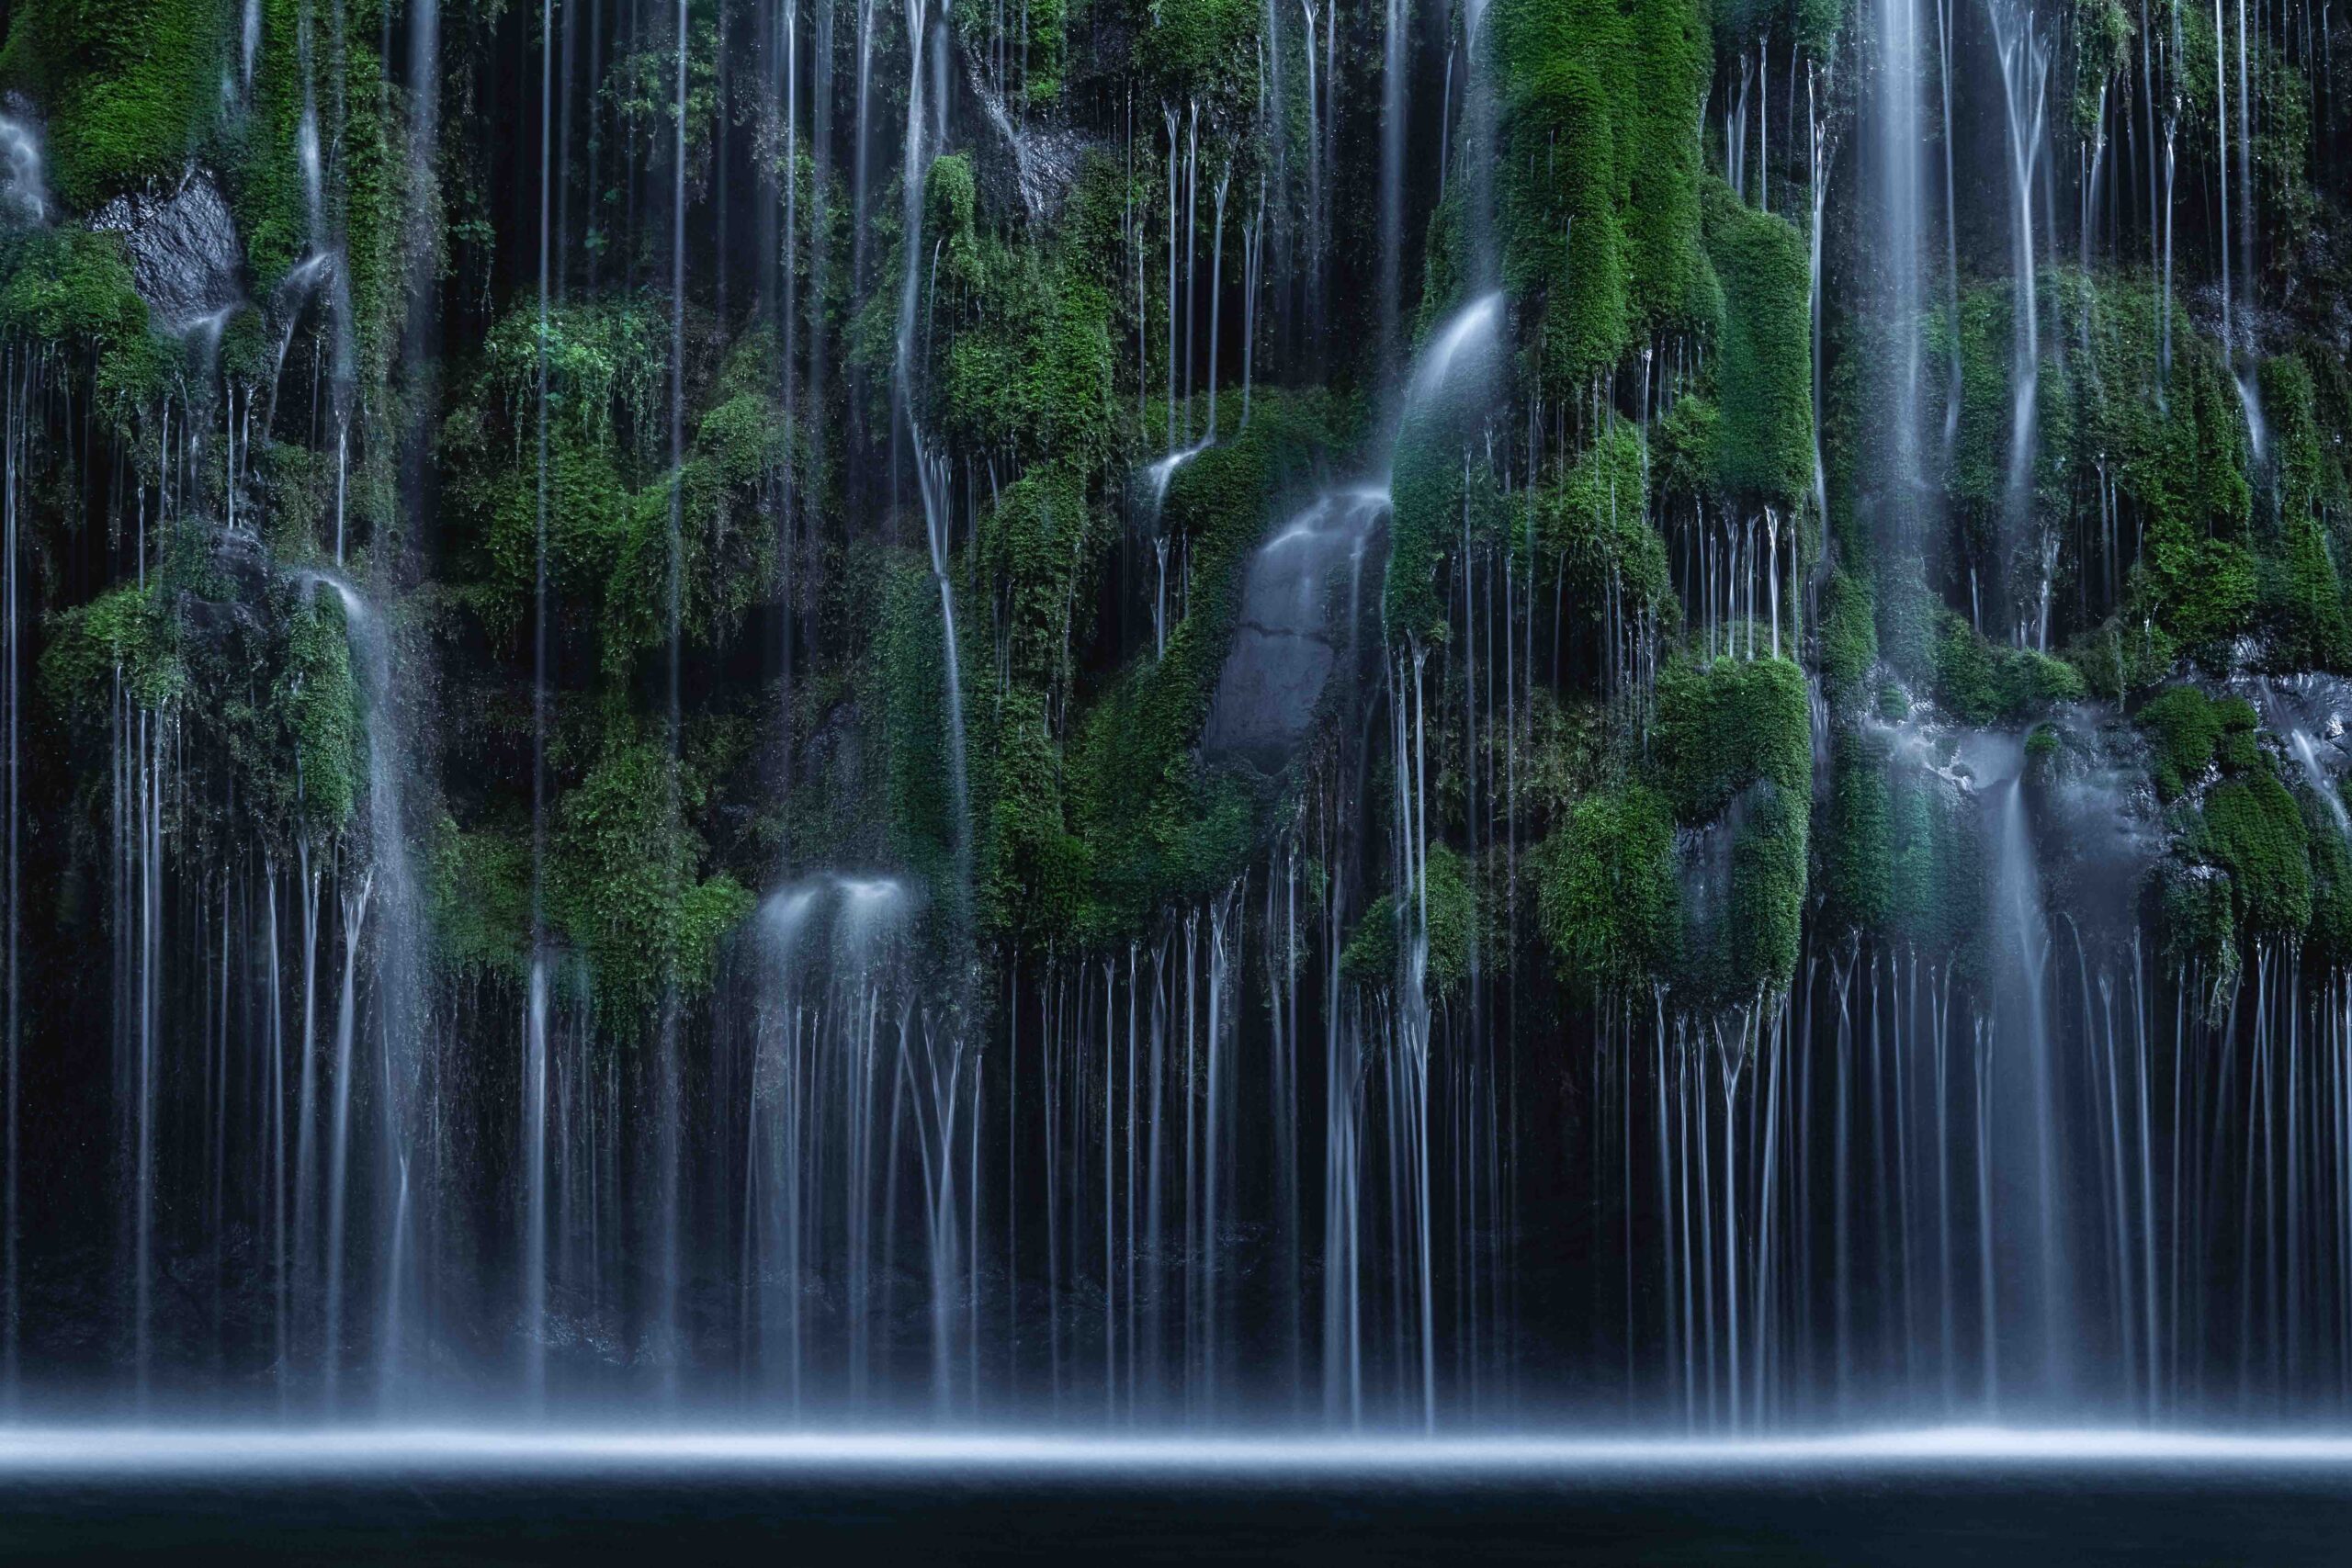 Long exposure photography of water flowing down a lush, mossy wall in the Pacific Northwest